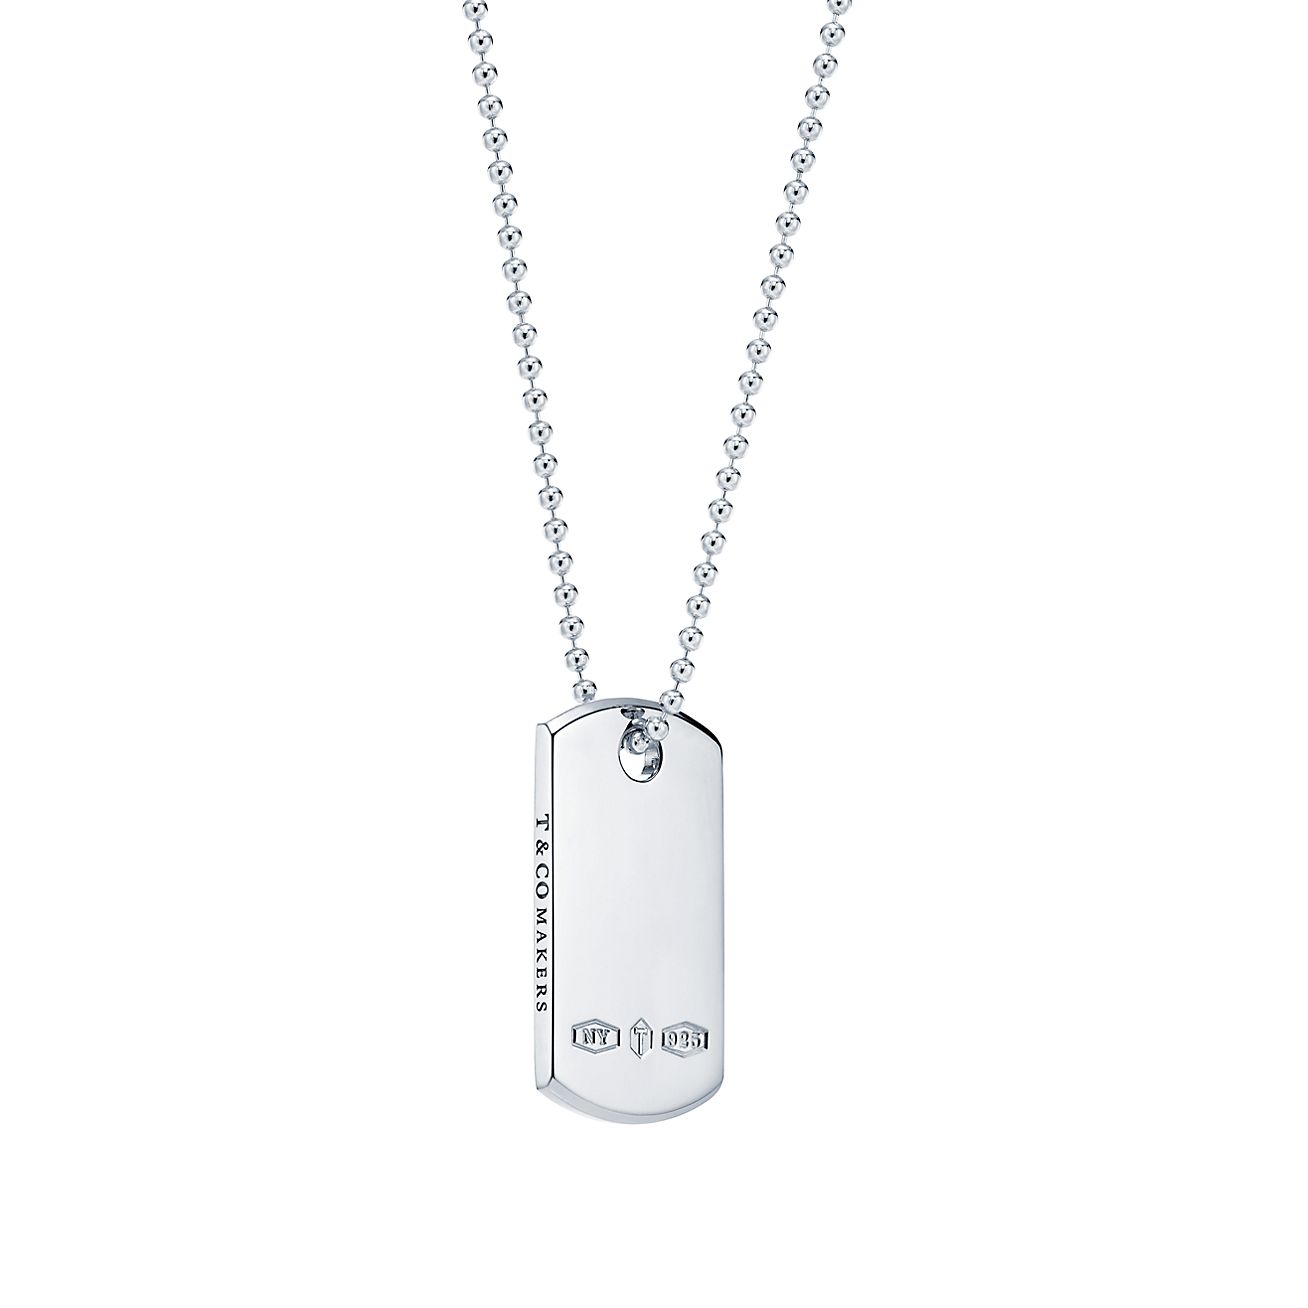 Tiffany 1837® Makers I.D. Tag Pendant in Sterling Silver, 24"